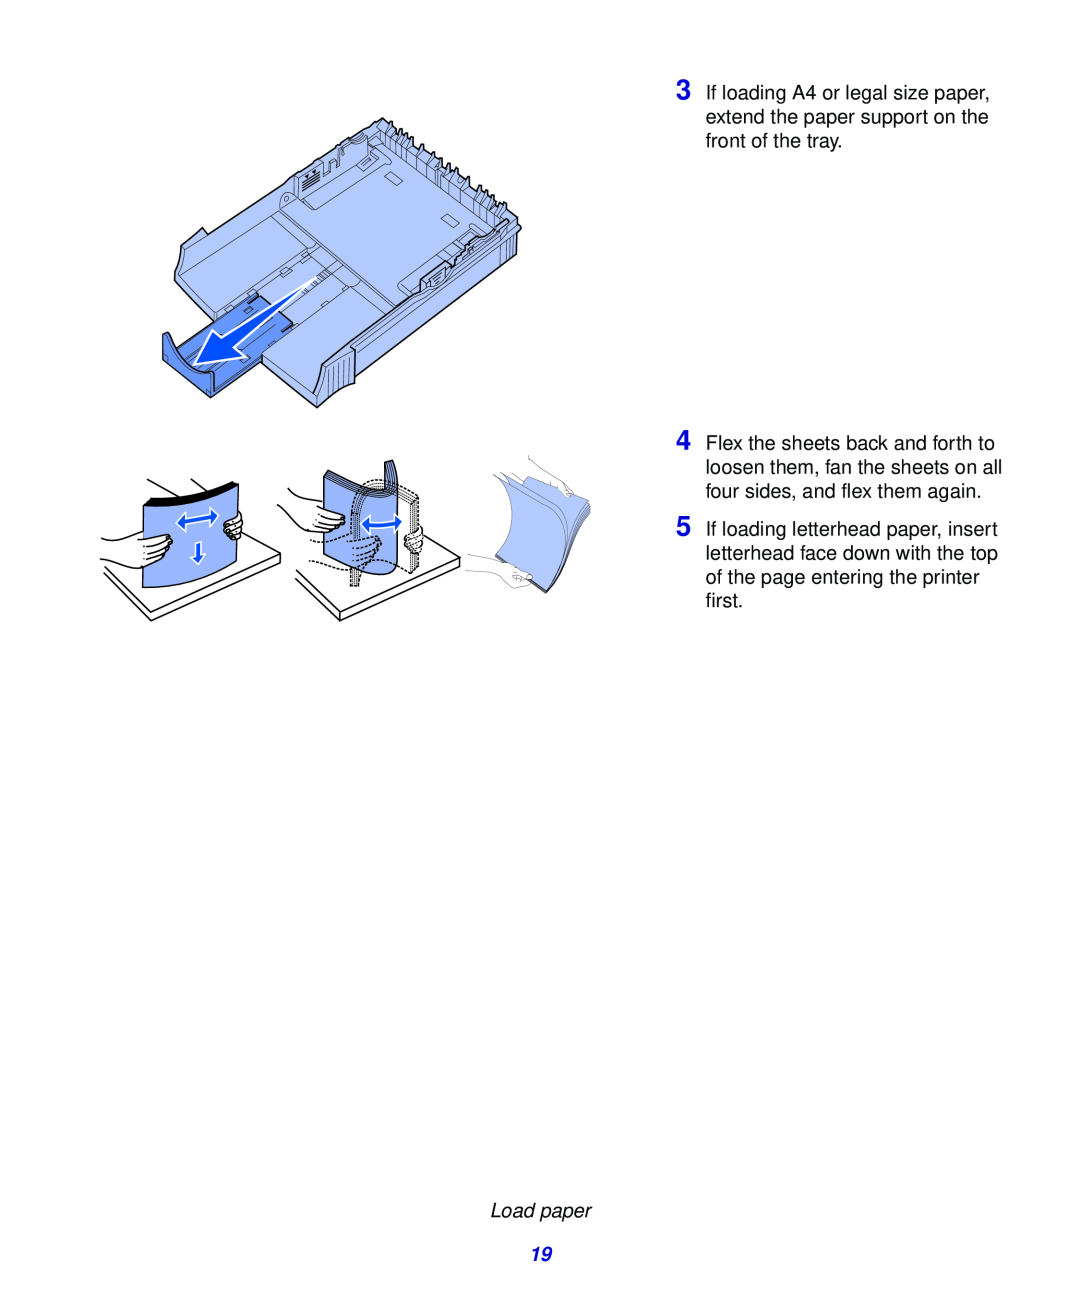 Lexmark 323, 321 setup guide If loading A4 or legal size paper, extend the paper support on the front of the tray 